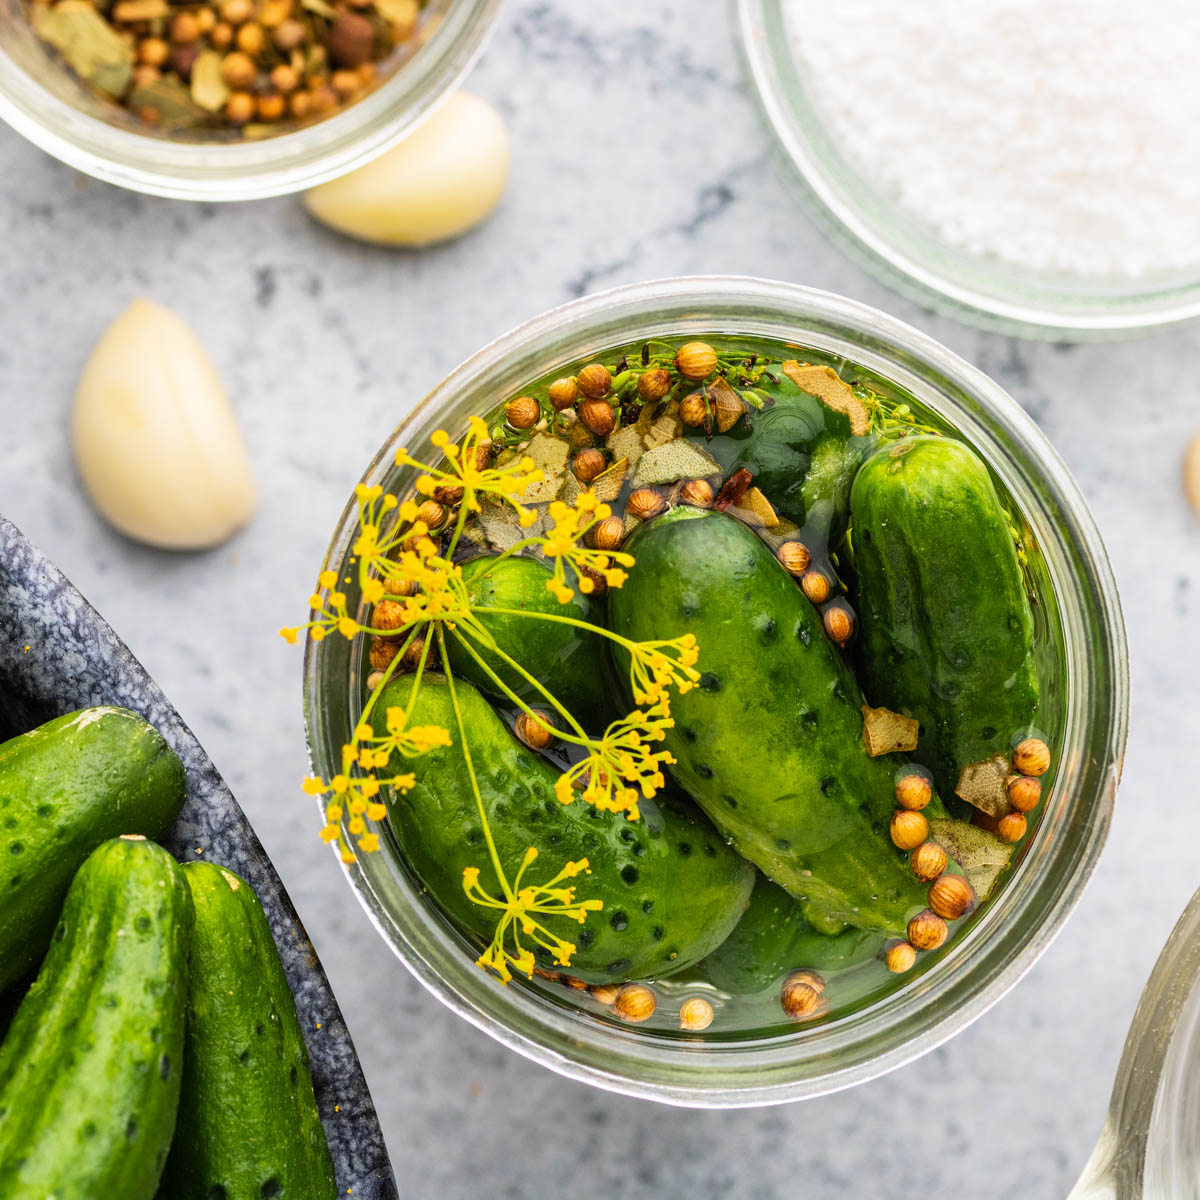 Small cucumbers in a jar along with garlic, dill, and pickling spices.